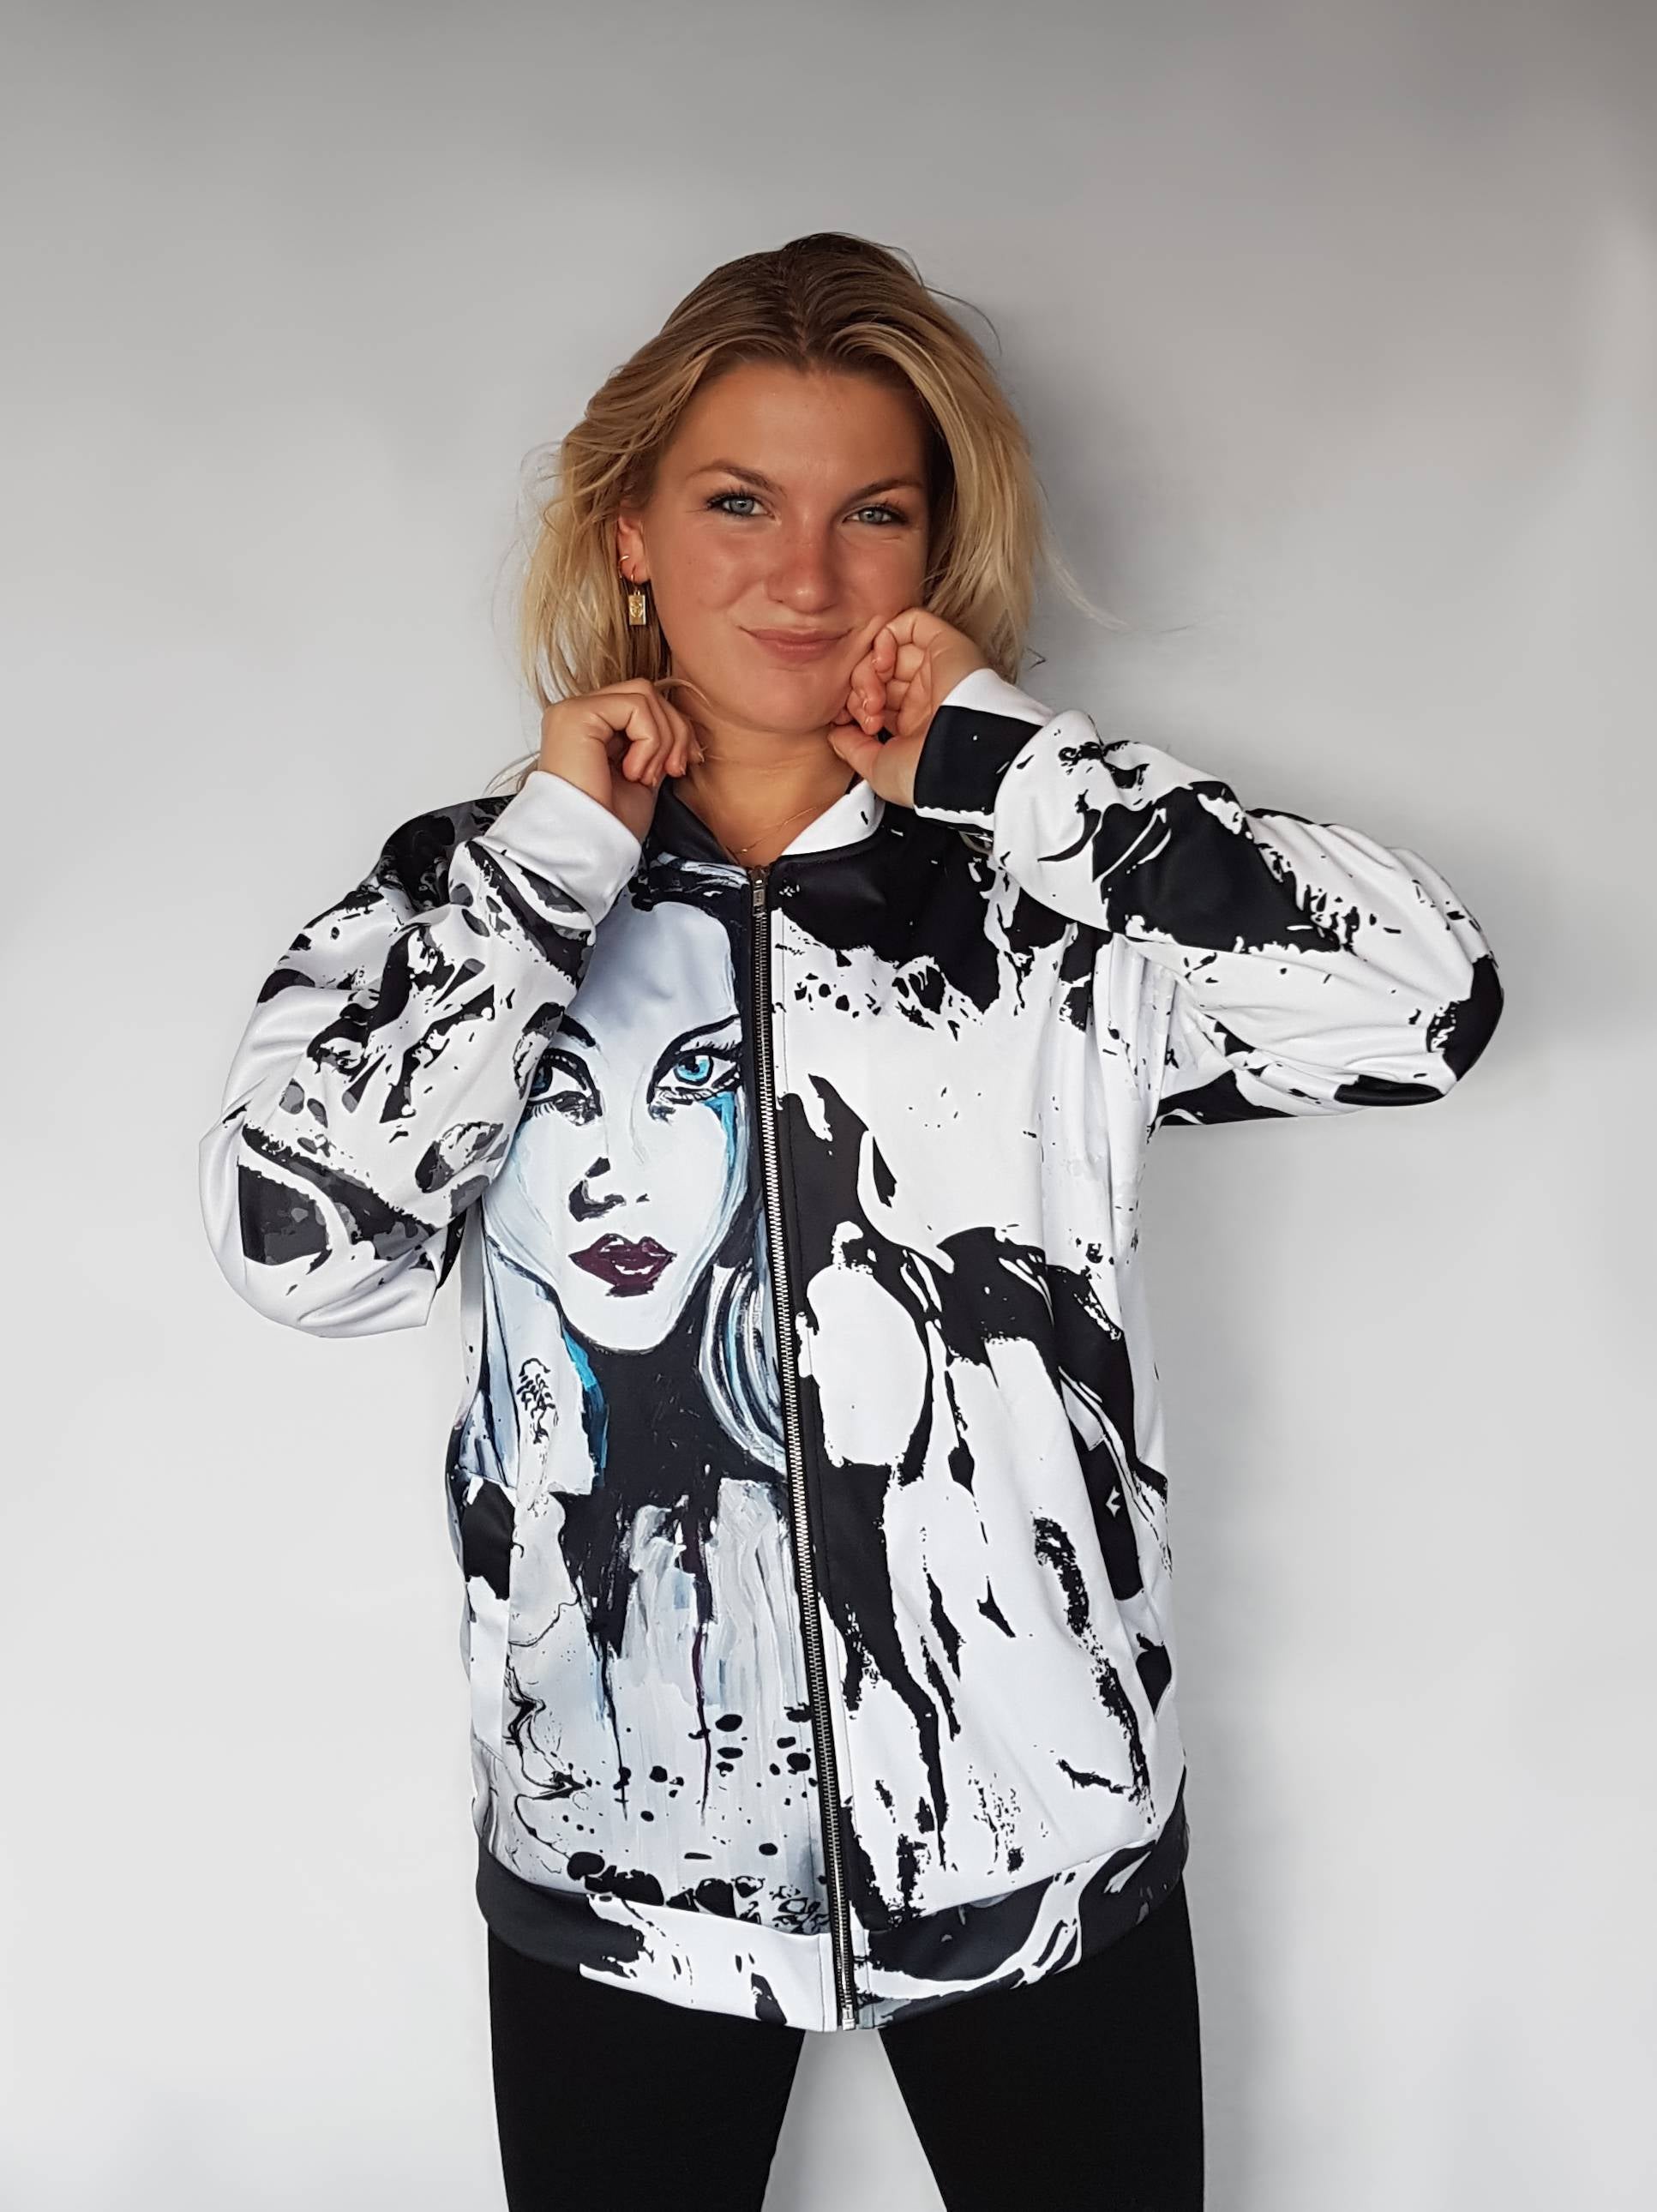 scorpion jacket with black and white print and fleece inside making it a warm choice for all throughout the year